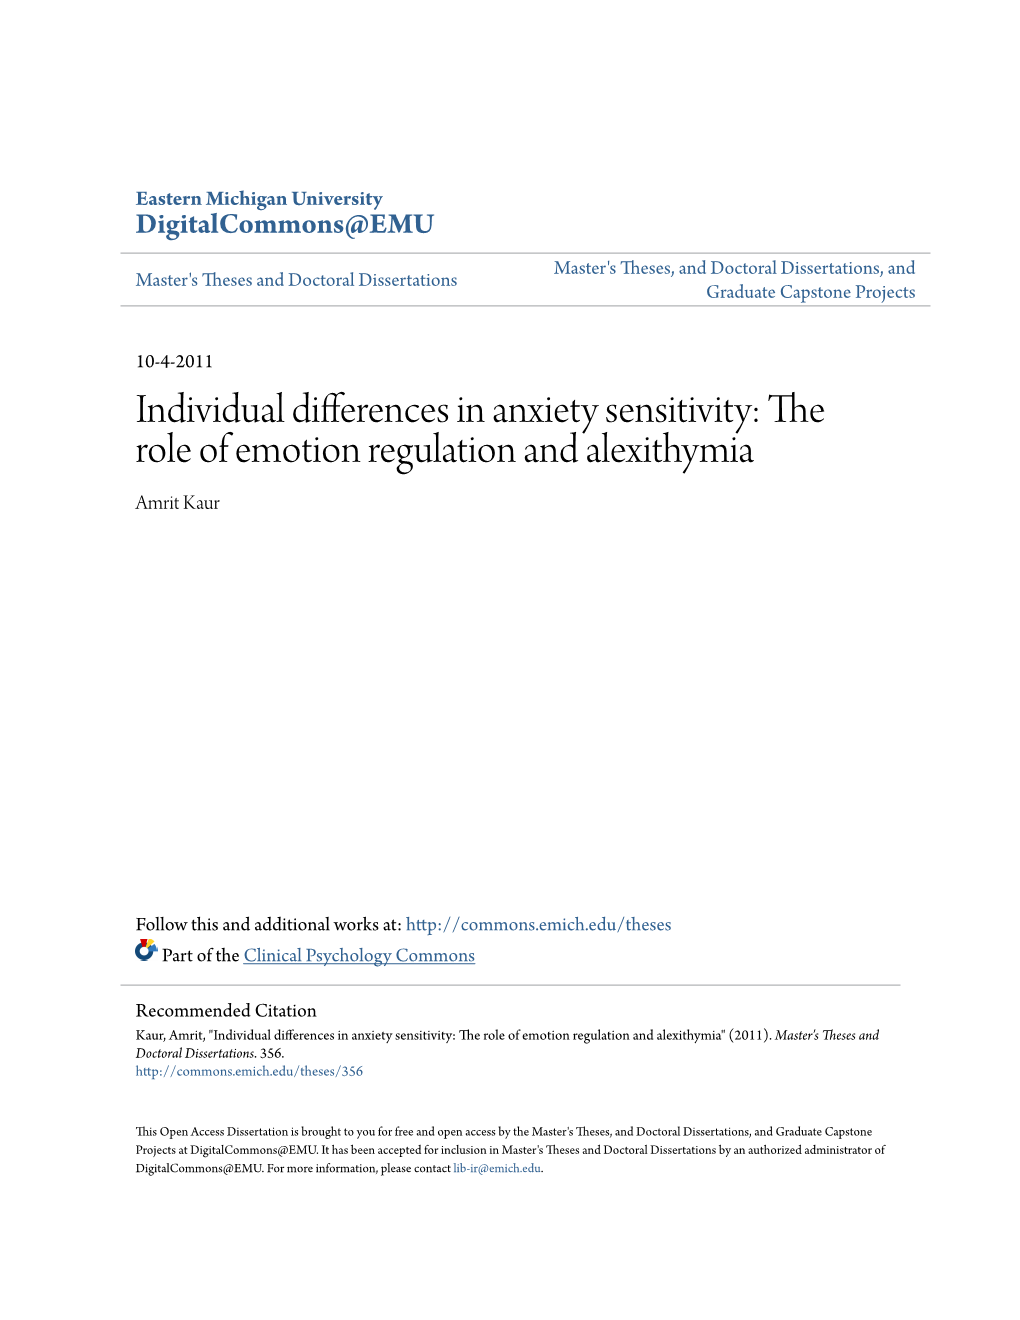 Individual Differences in Anxiety Sensitivity: the Role of Emotion Regulation and Alexithymia Amrit Kaur